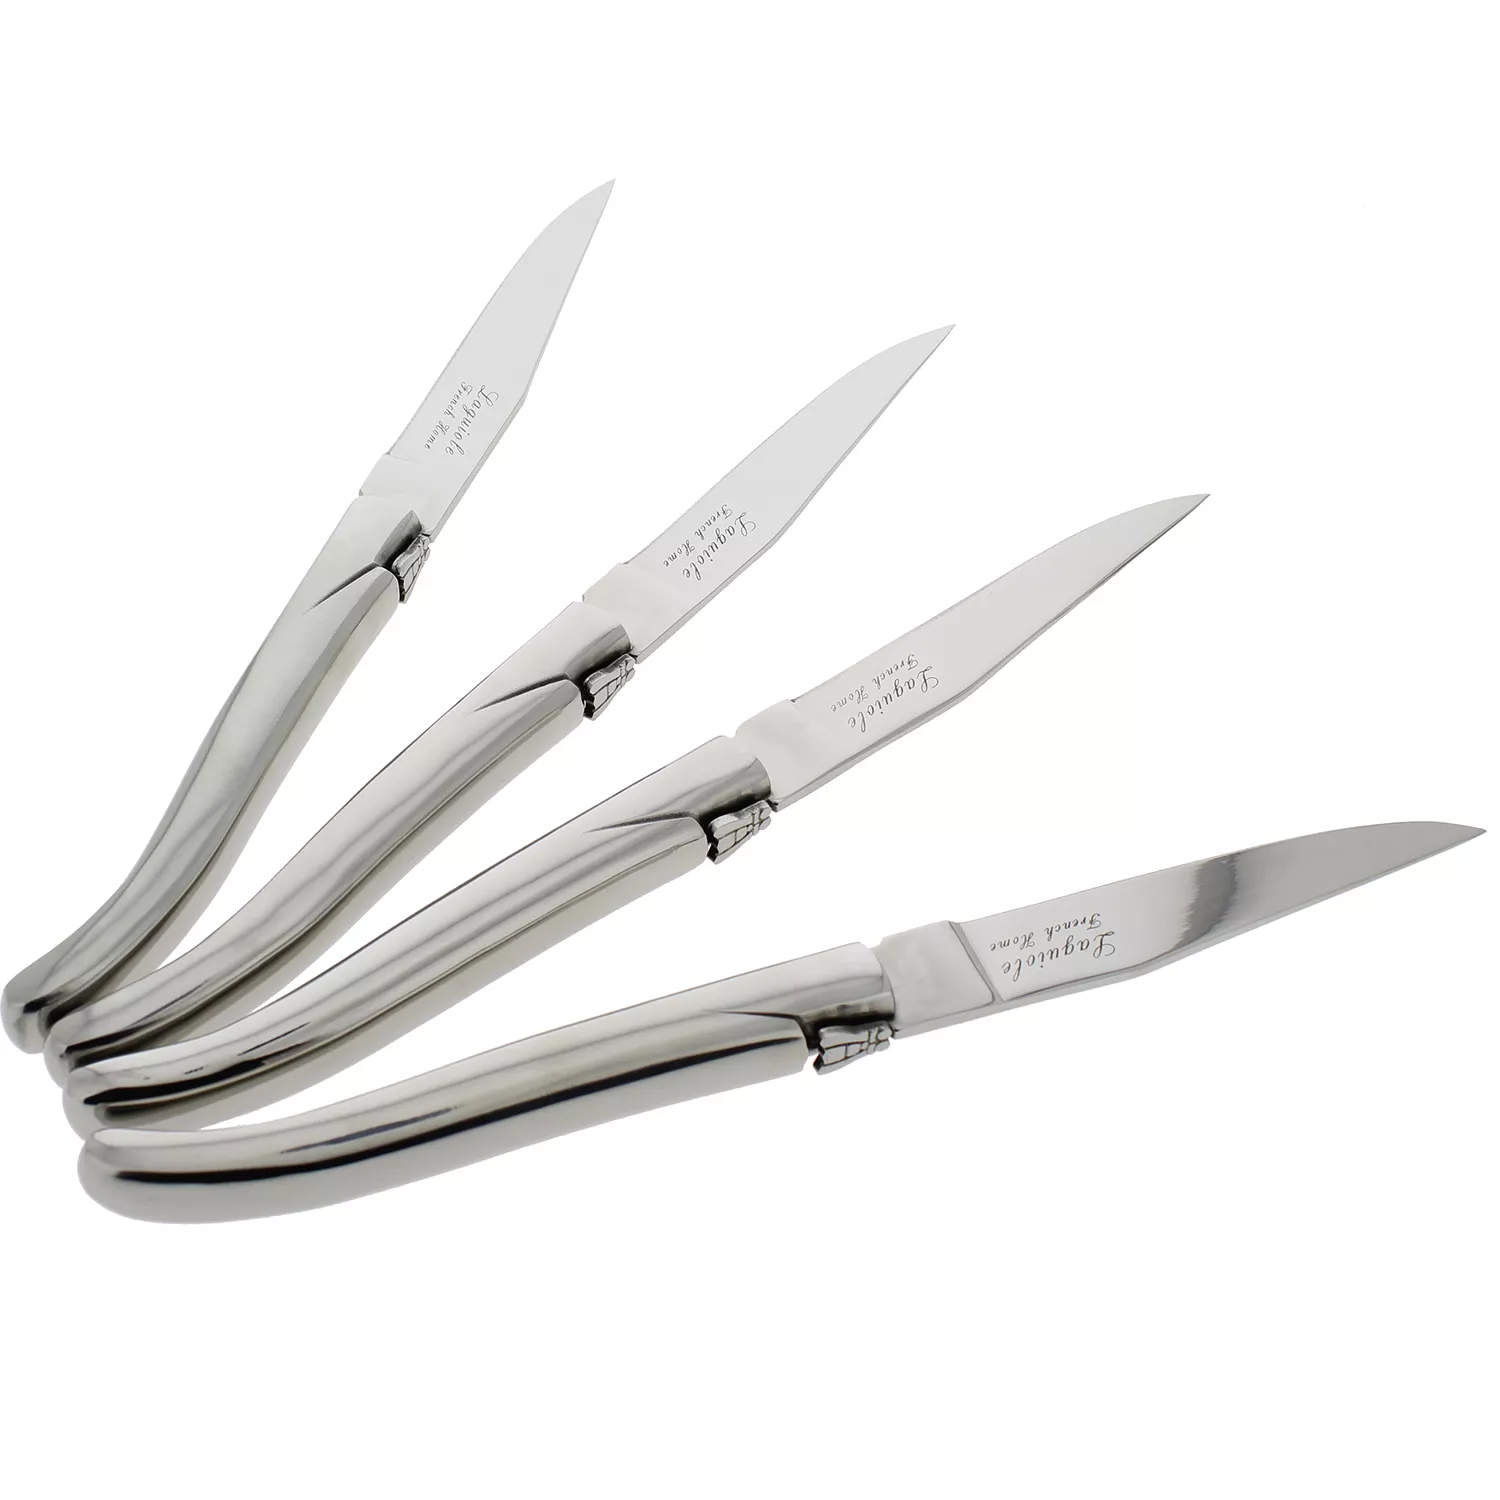 Laguiole Heavy Stainless Steel Steak Knives, set of 4 - Whisk